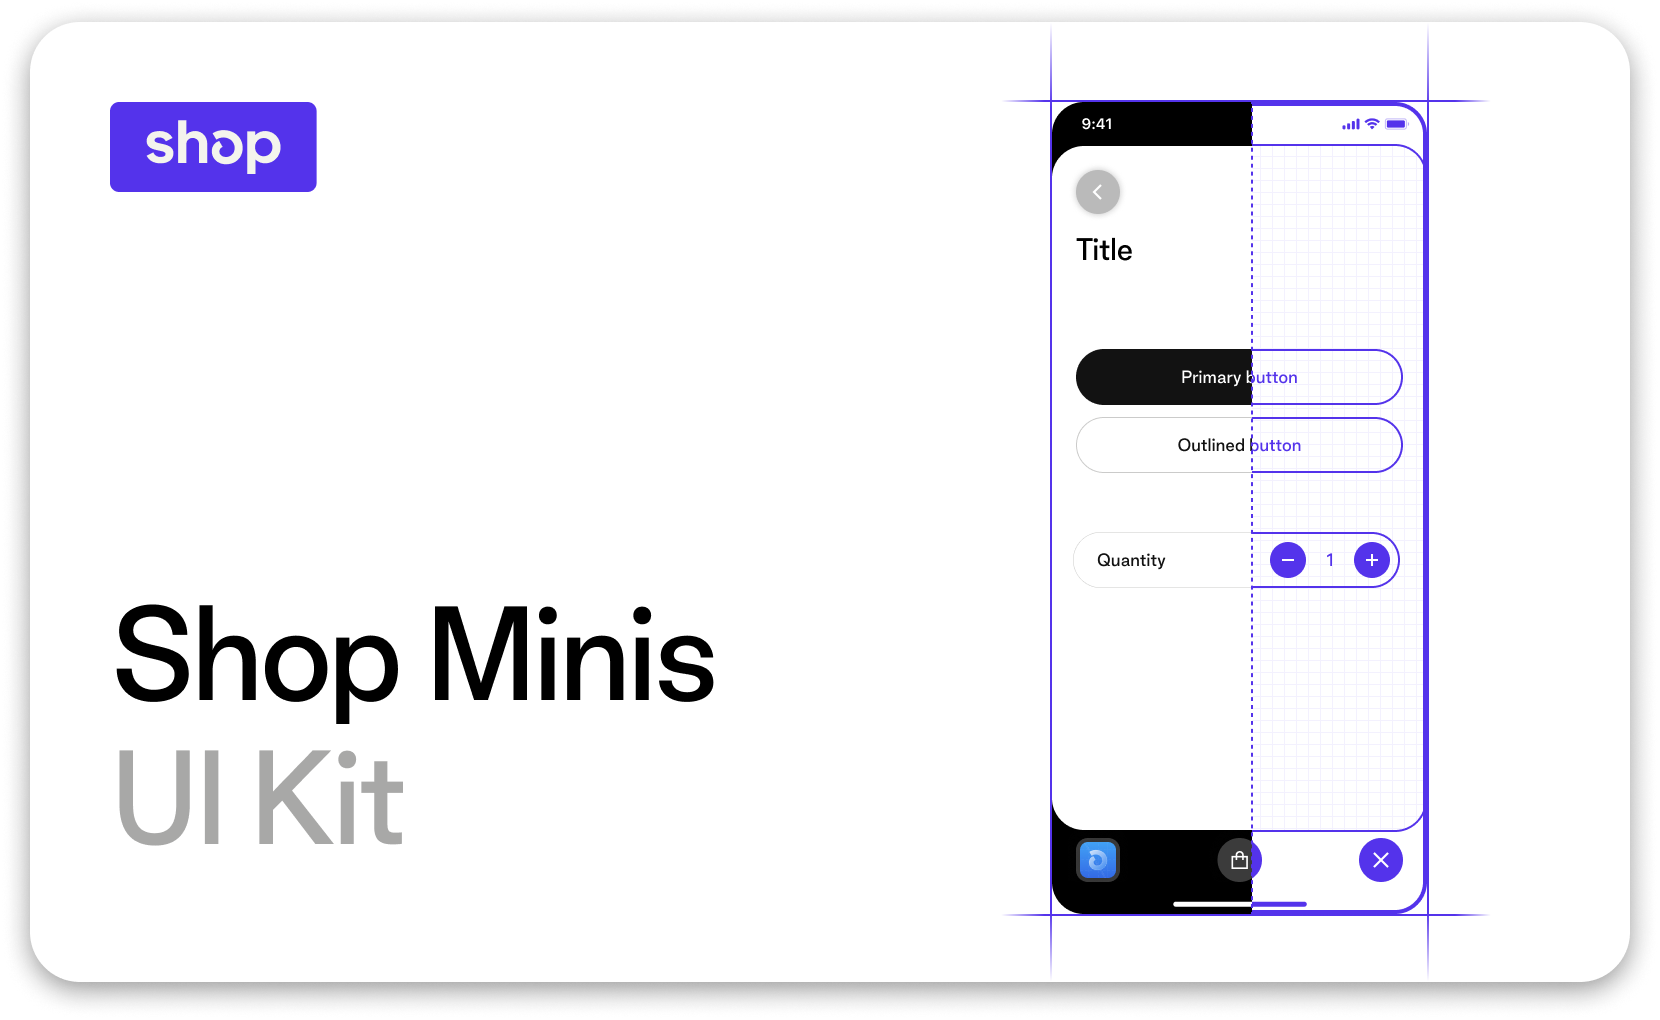 Image of the Figma UI Kit for Shop Minis